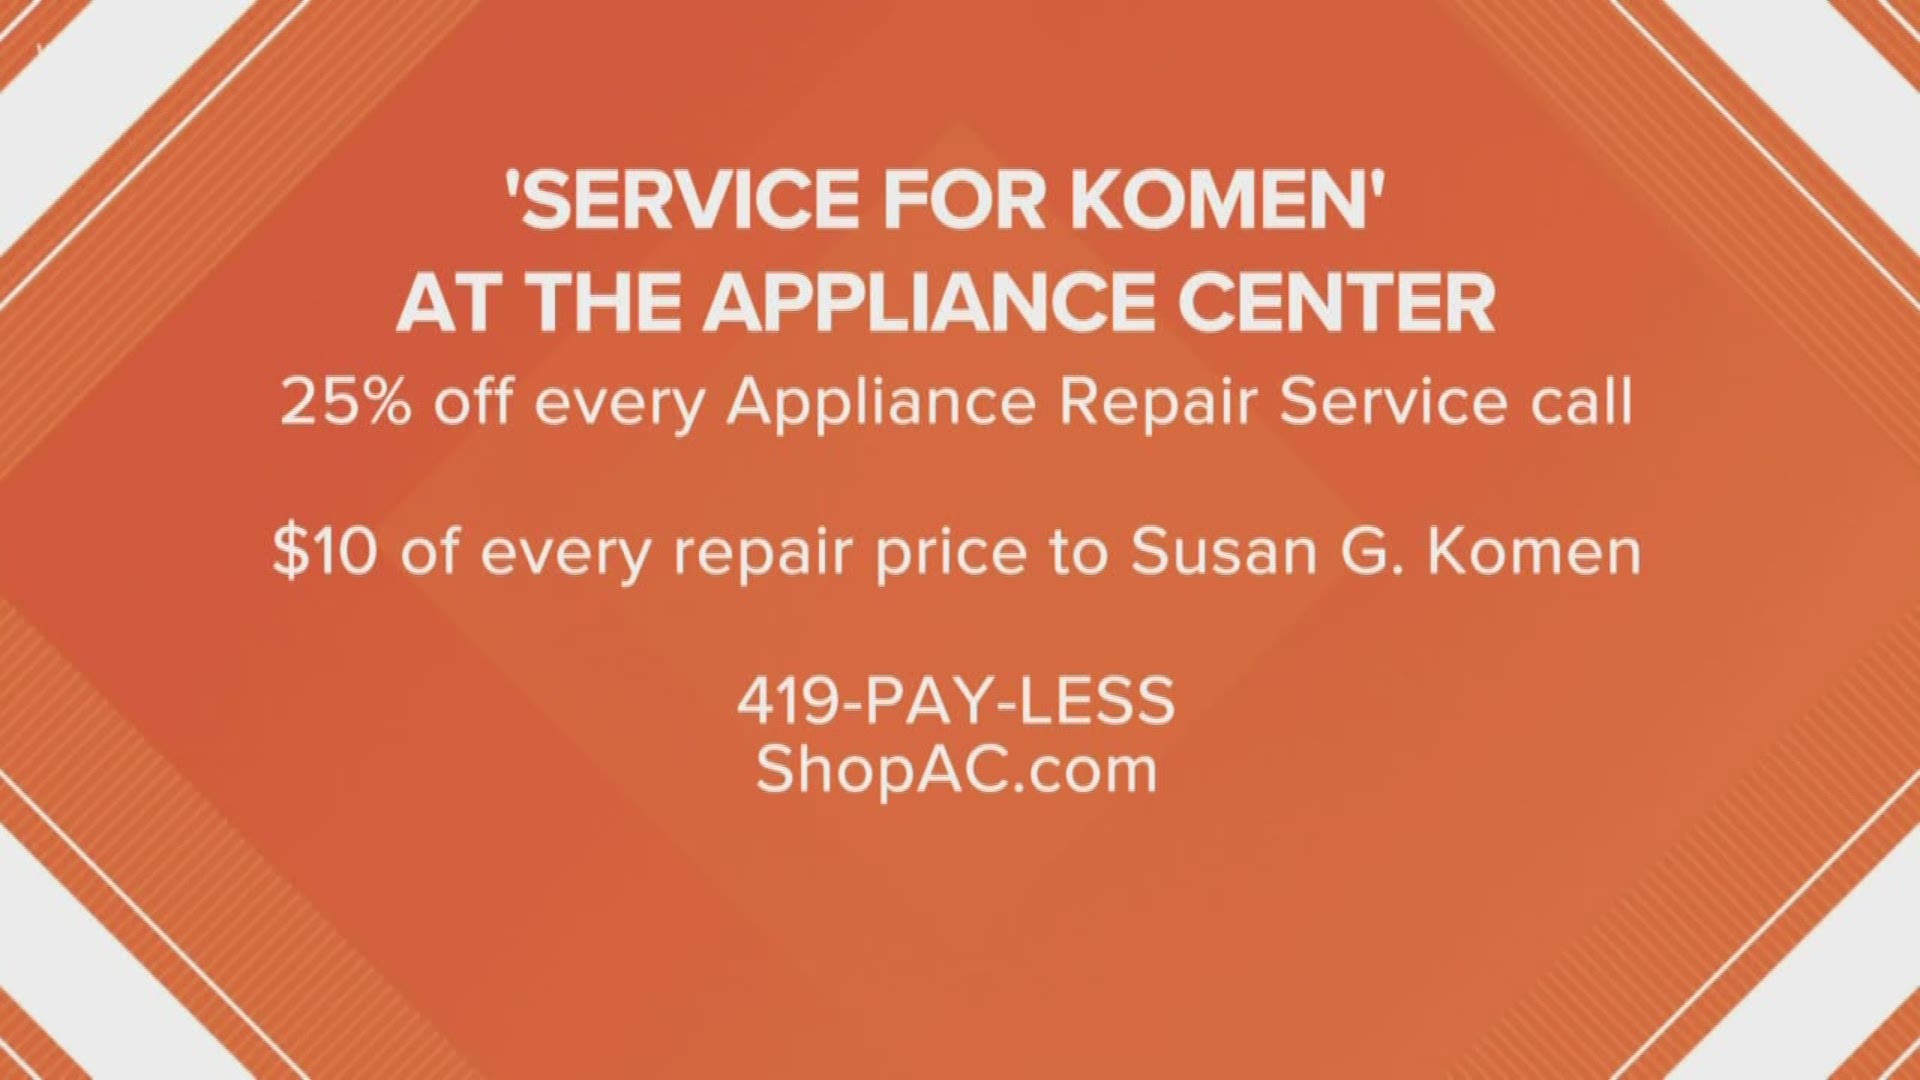 If you're appliance is on the fritz, good news for you; you can save money and help a great cause with Appliance Center and Susan G. Komen!